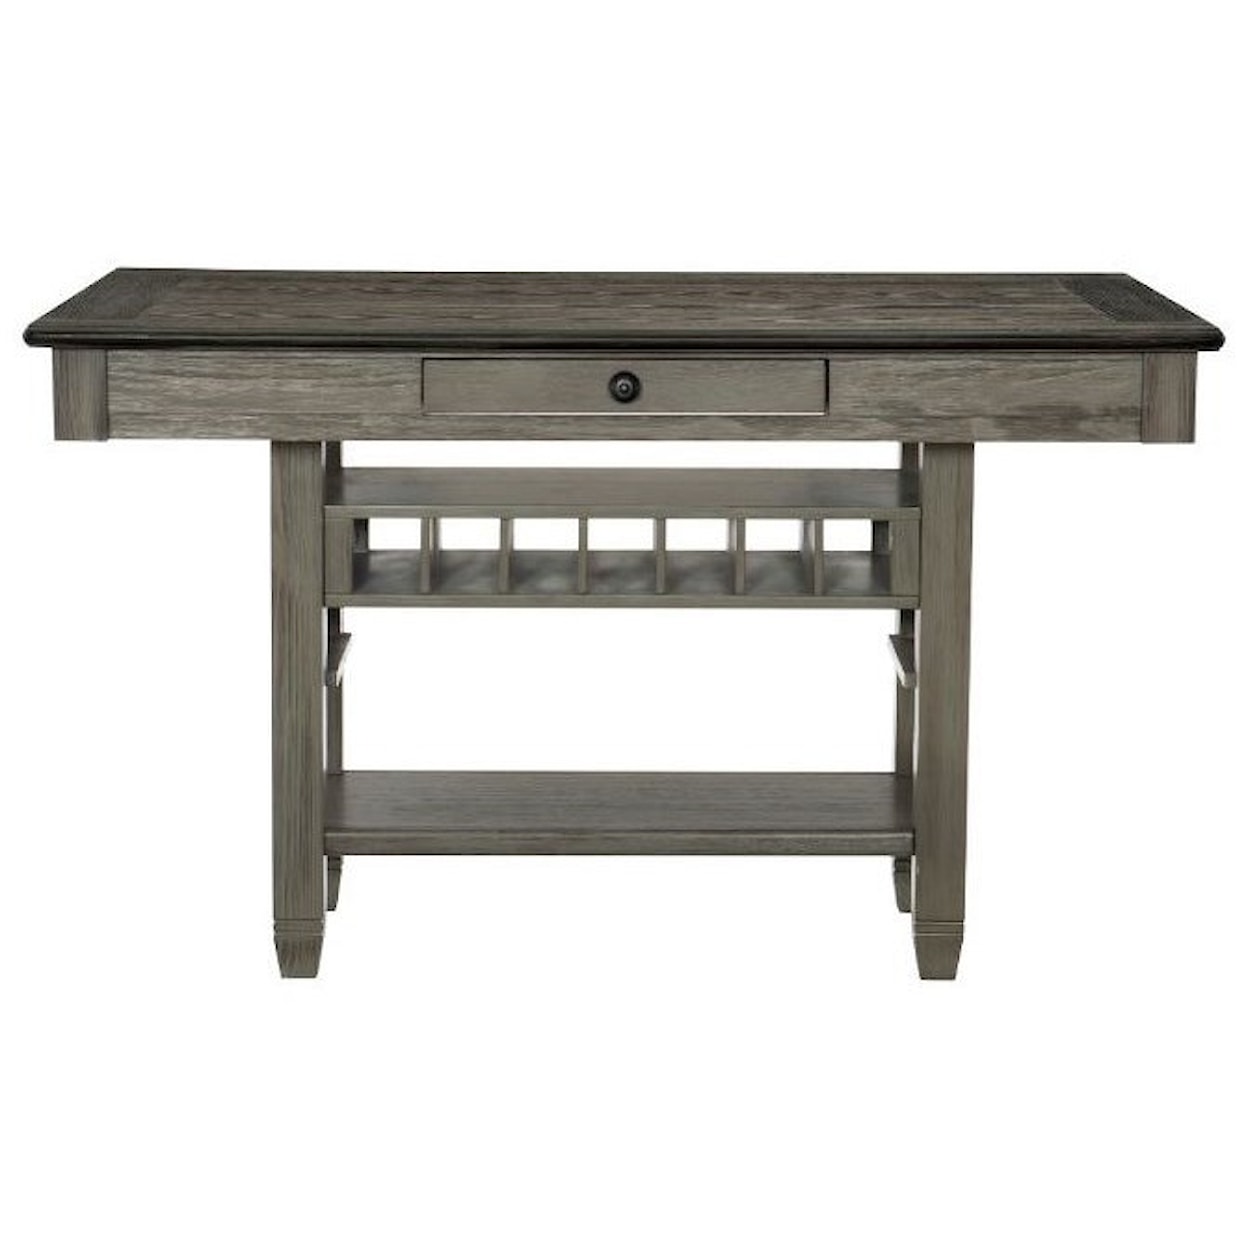 Homelegance Granby Counter Height Table